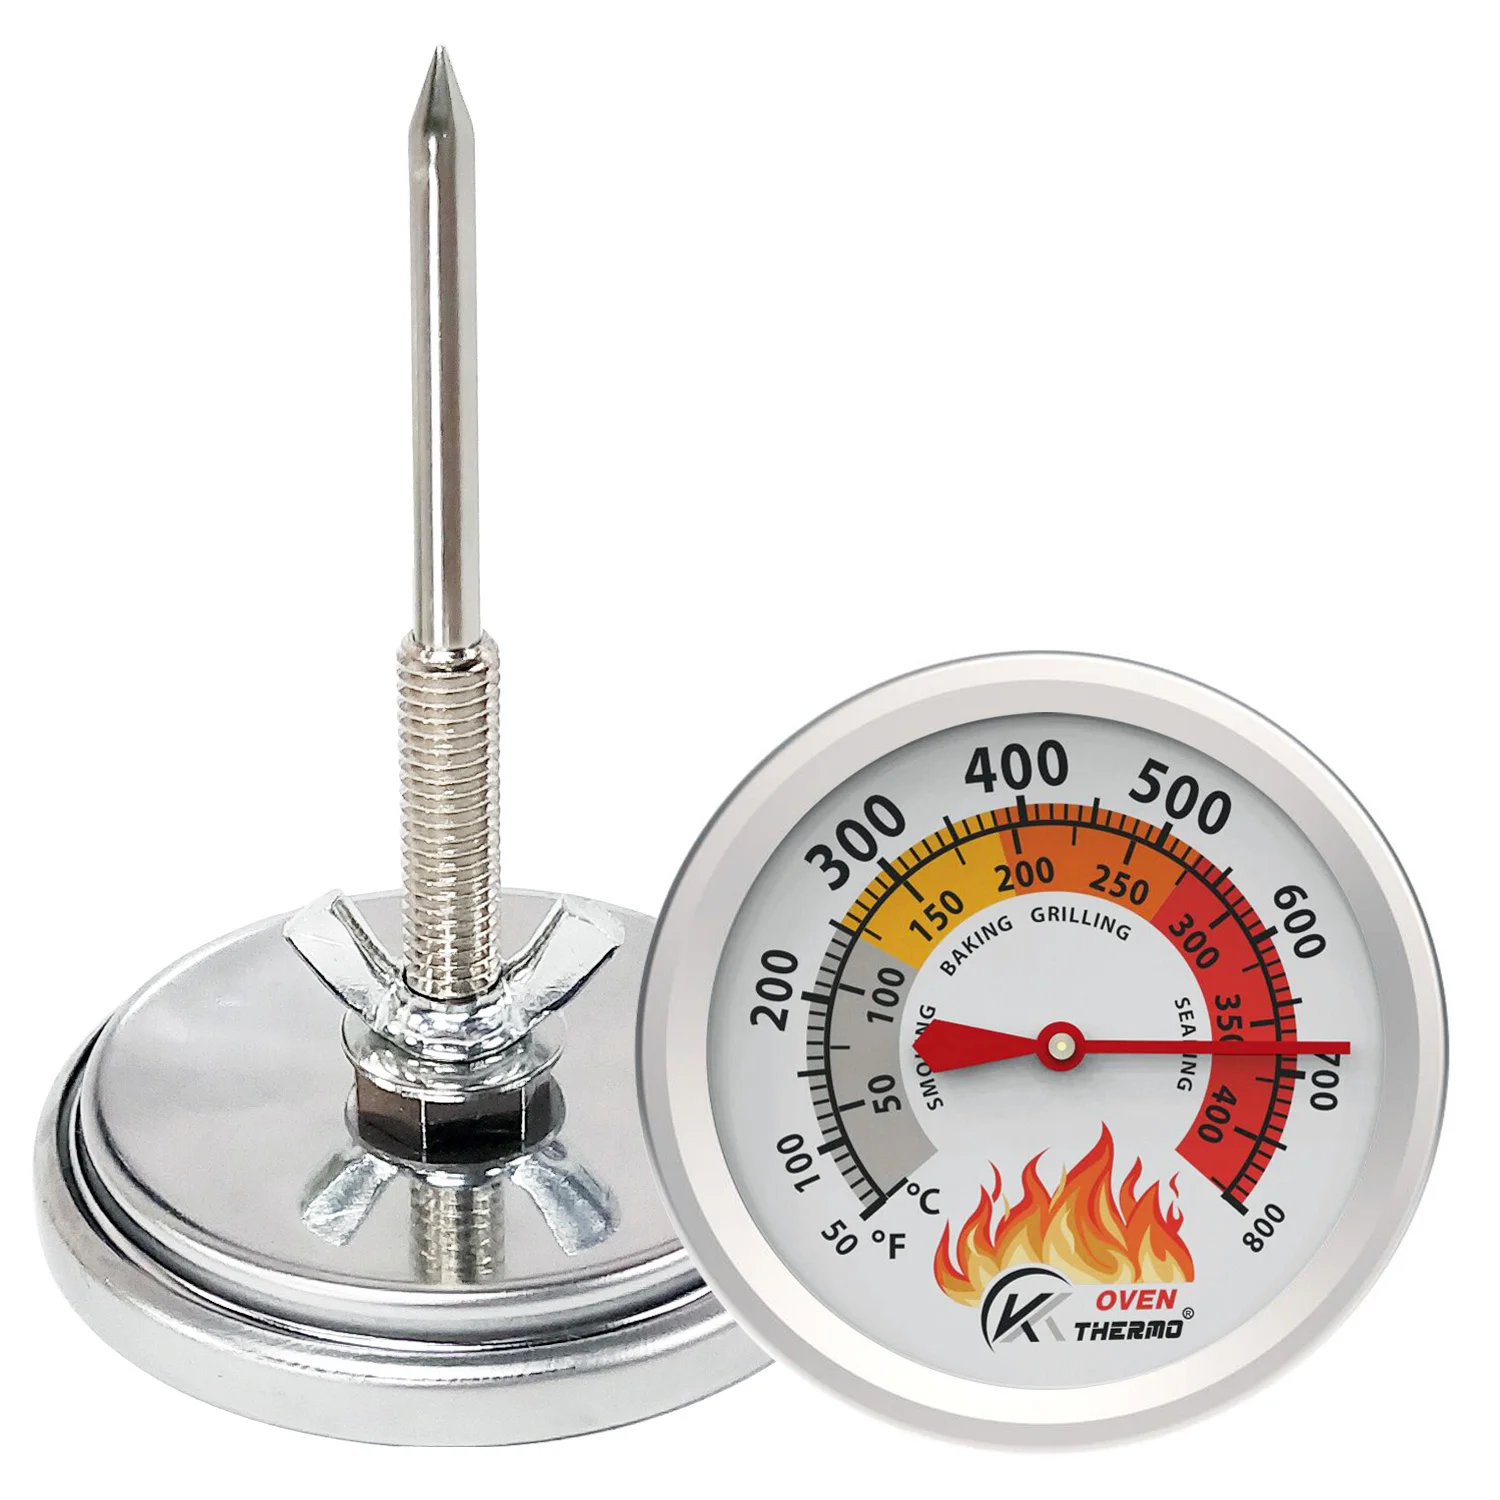 KT Thermo BBQ Grill Thermometer for Smoker Grill Parts Replacement, 2.5  Dial Barbecue Temperature Gauge